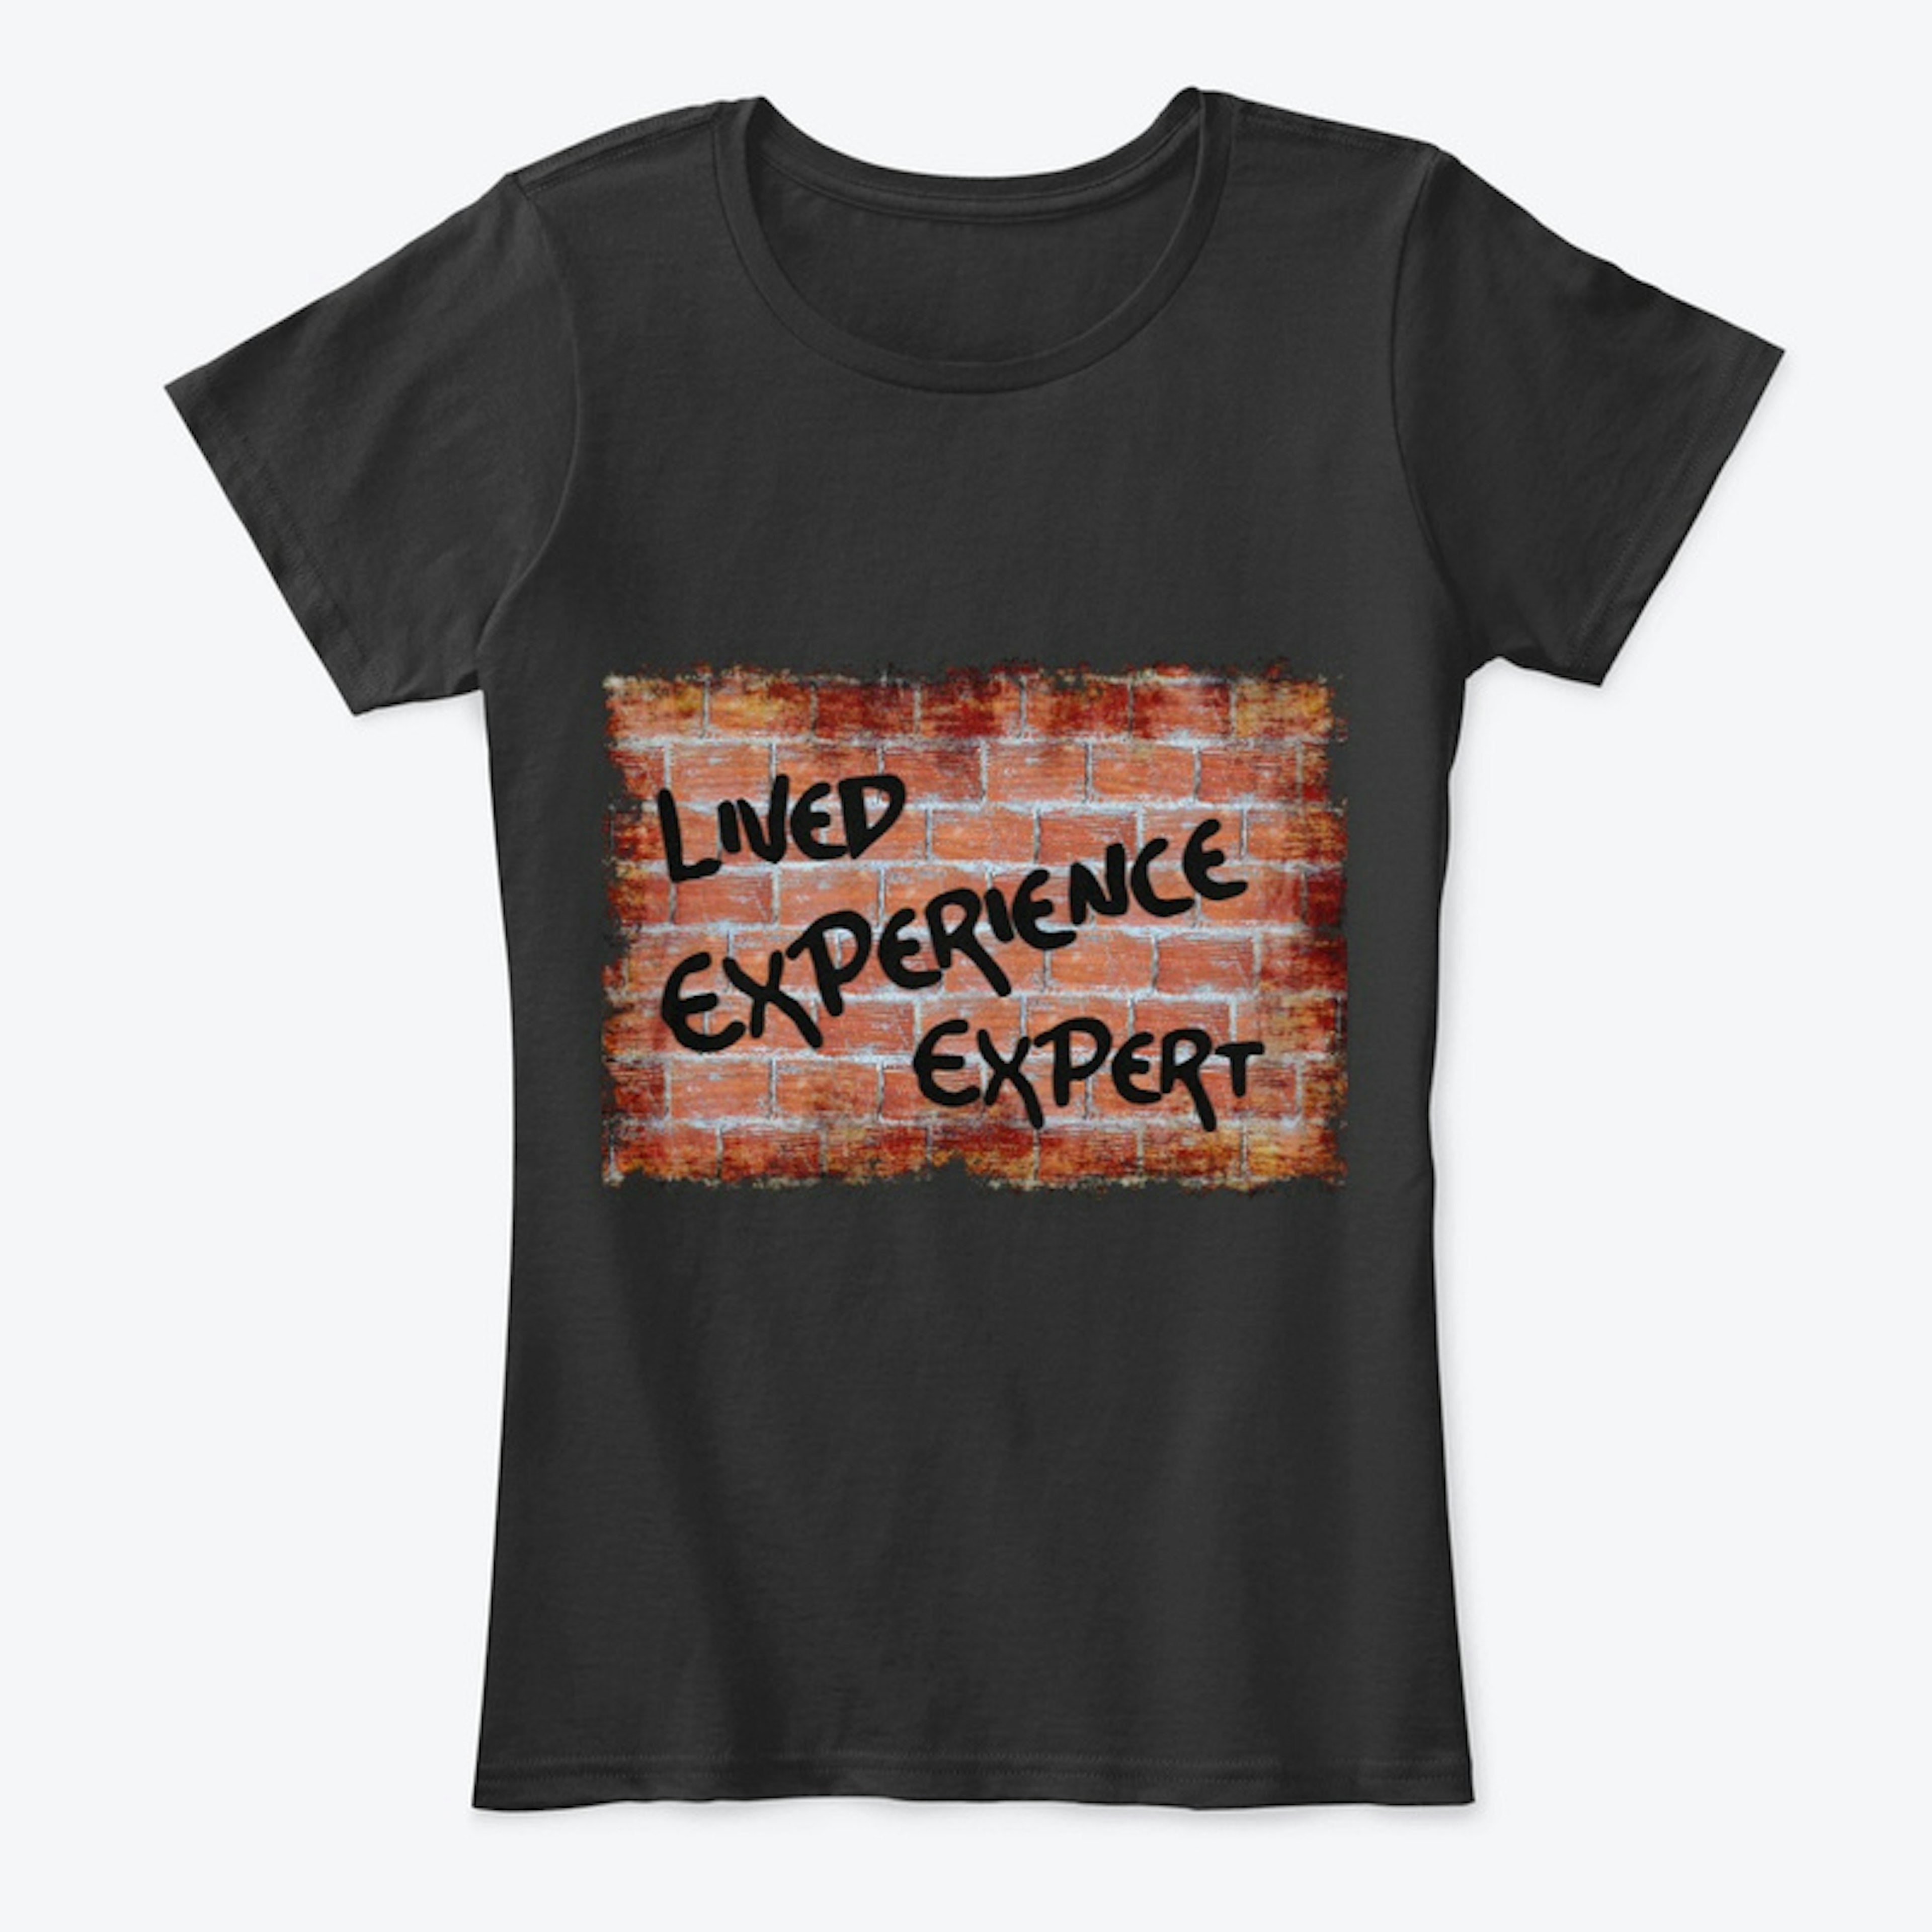 Lived Experience Expert